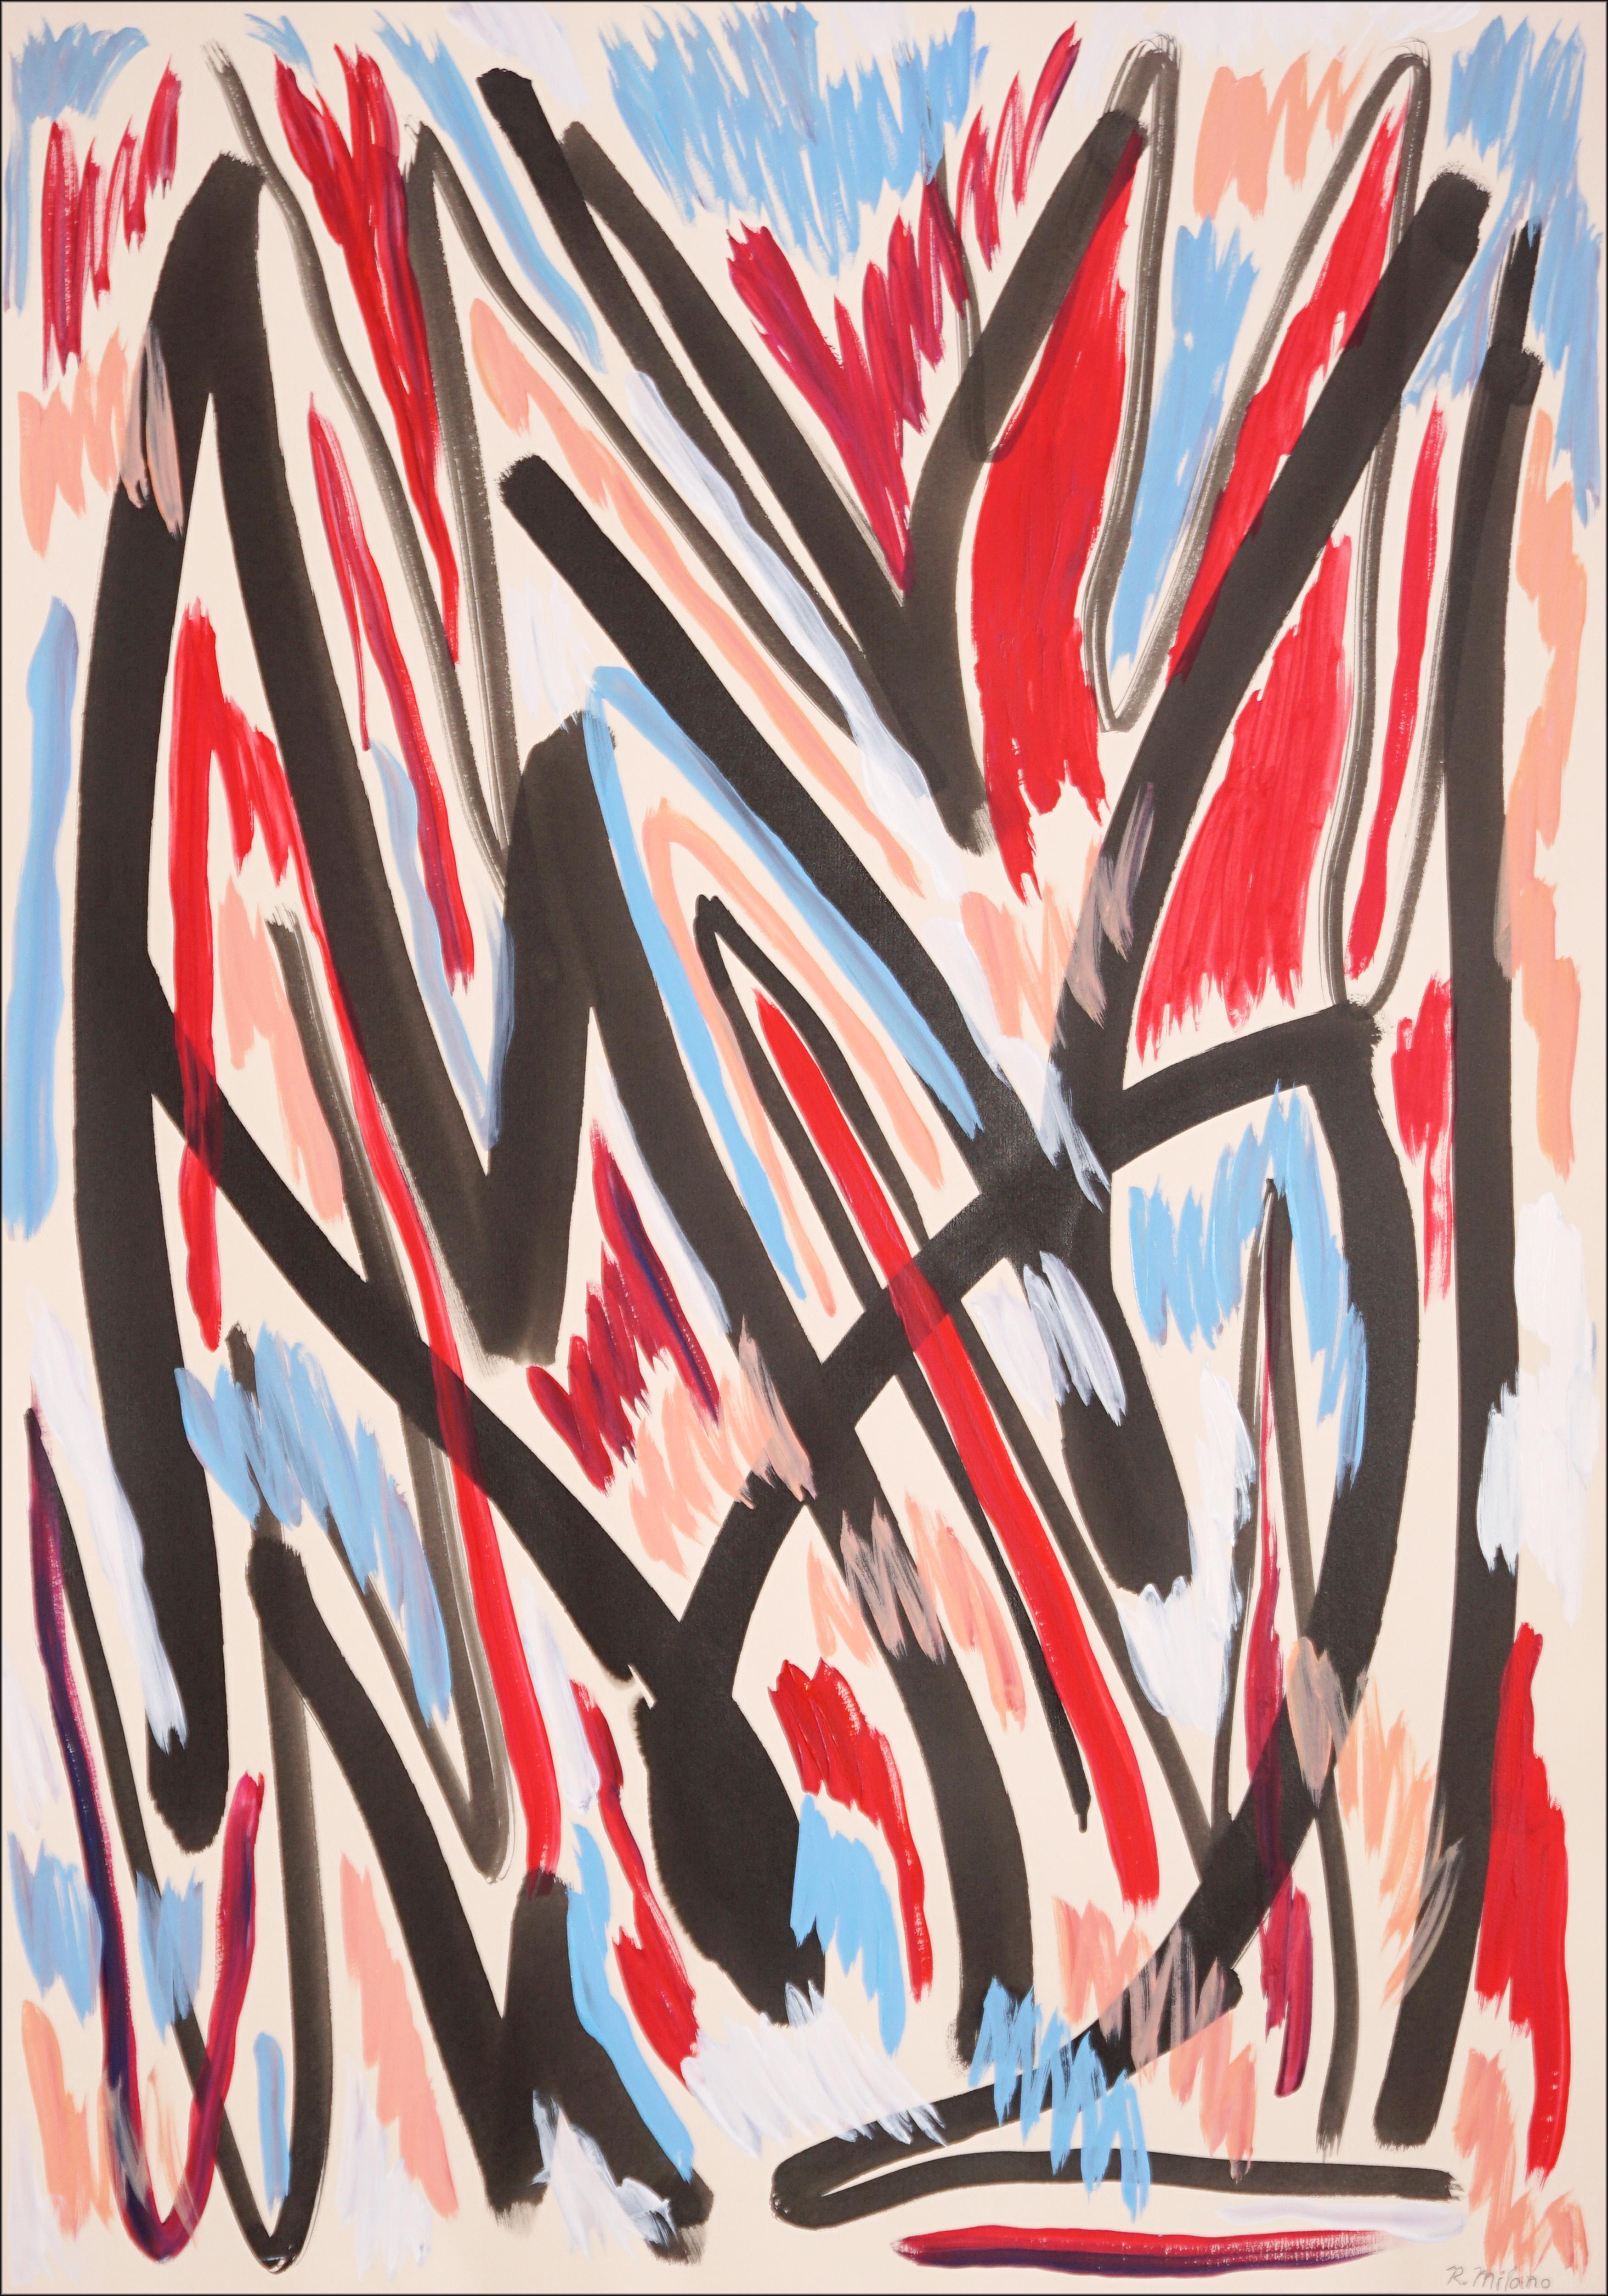 Romina Milano Abstract Painting - Changing Seasons, Abstract Expressionist Style in Red and Blue, Black Gestures